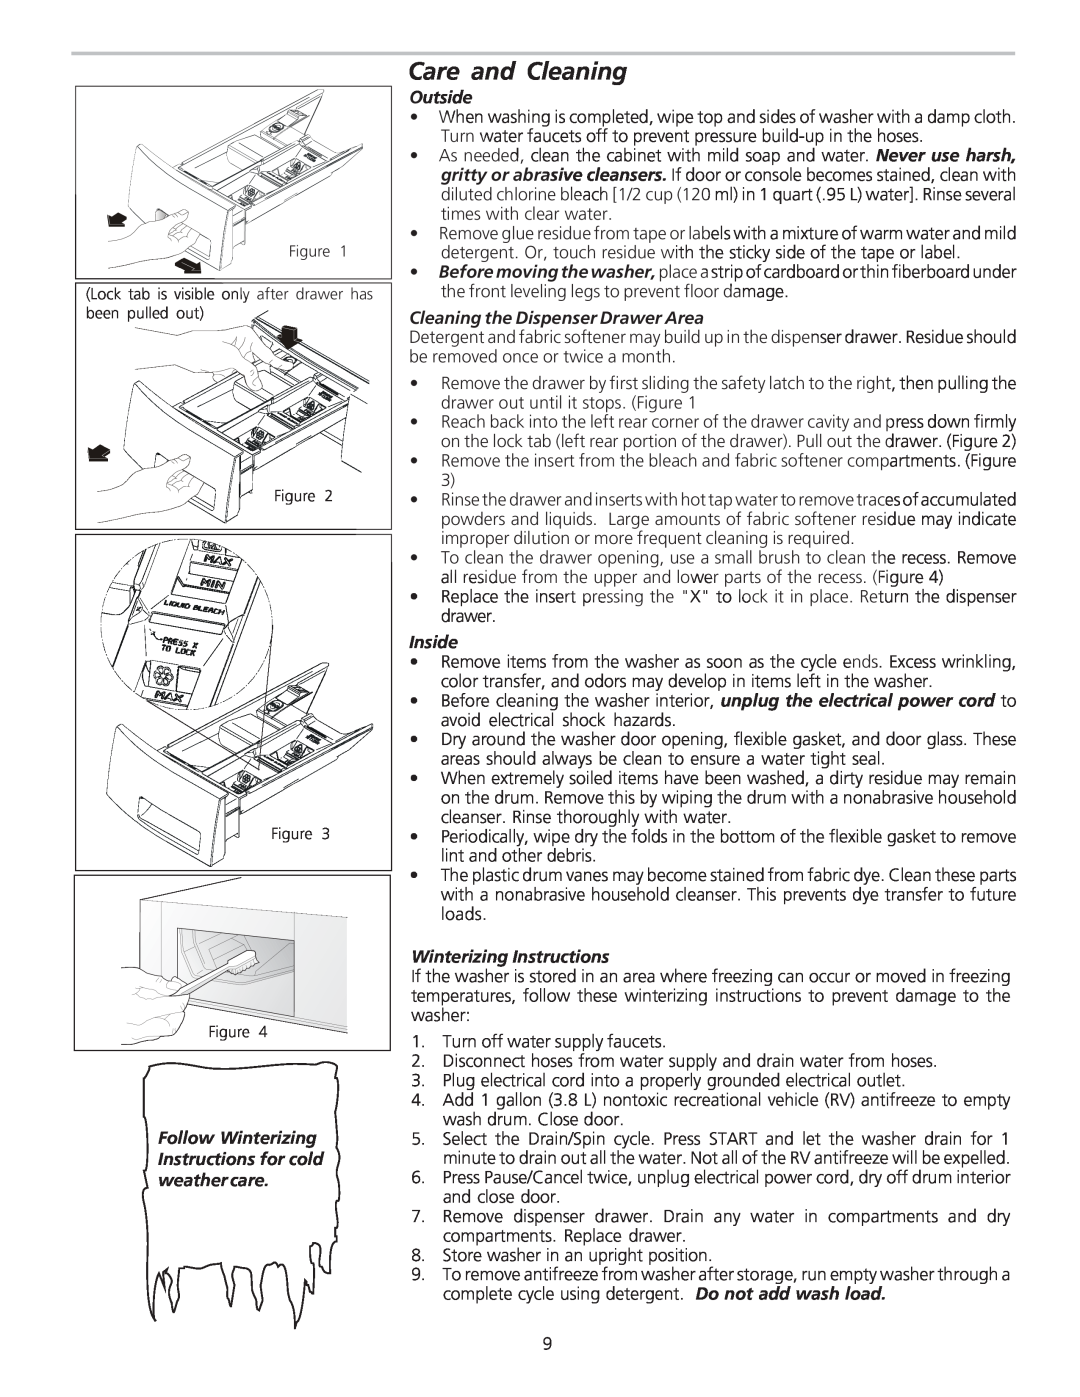 Frigidaire 134922600 Care and Cleaning, Follow Winterizing Instructions for cold weather care, Outside, Inside, English 